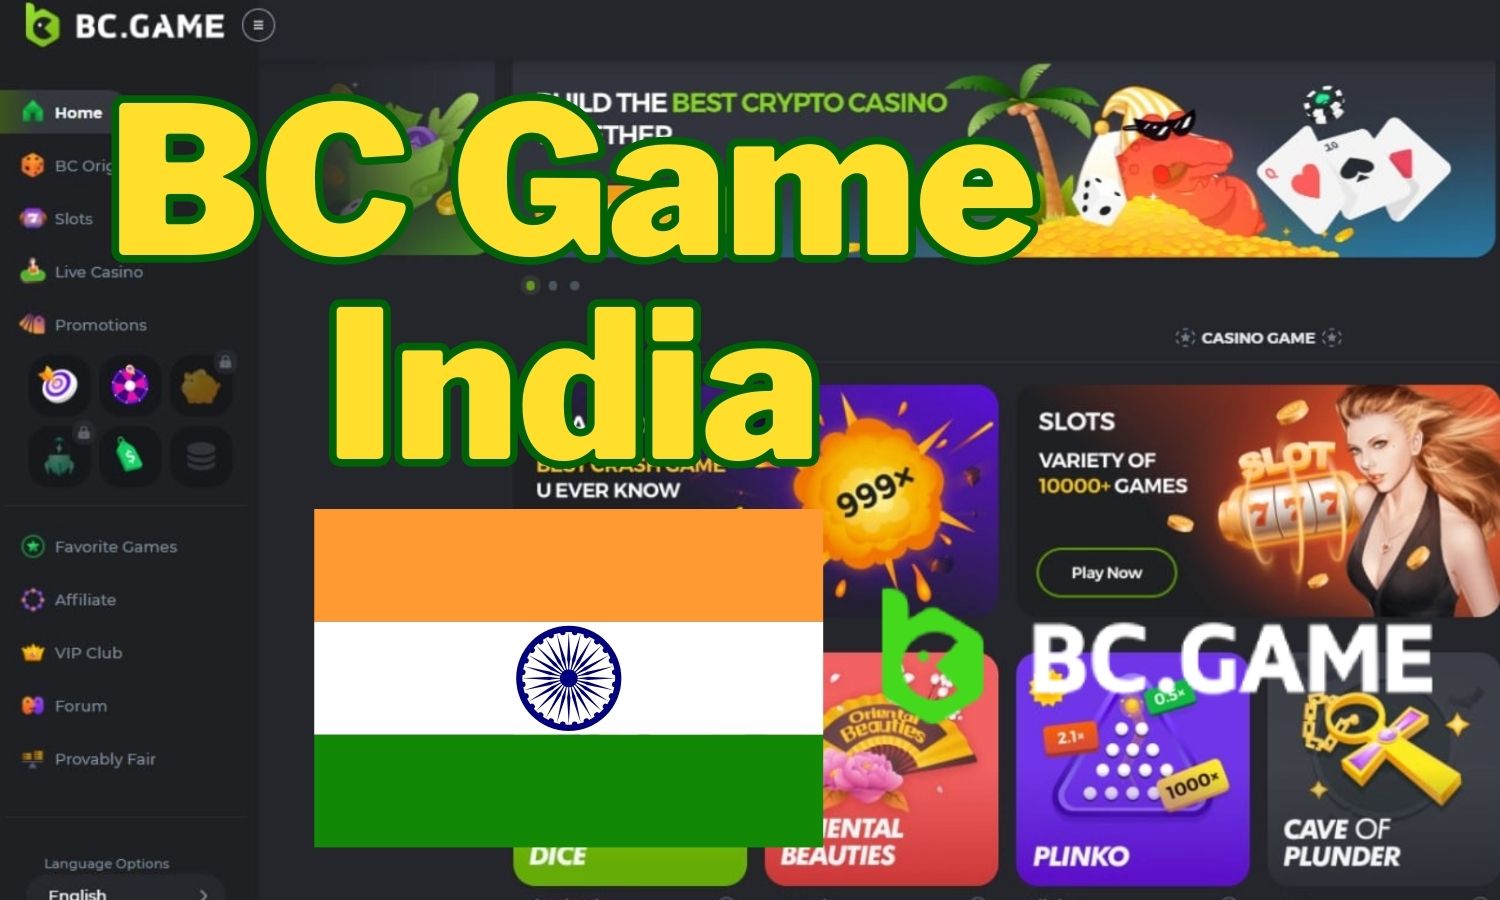 Why BC.Game is So Popular in India?